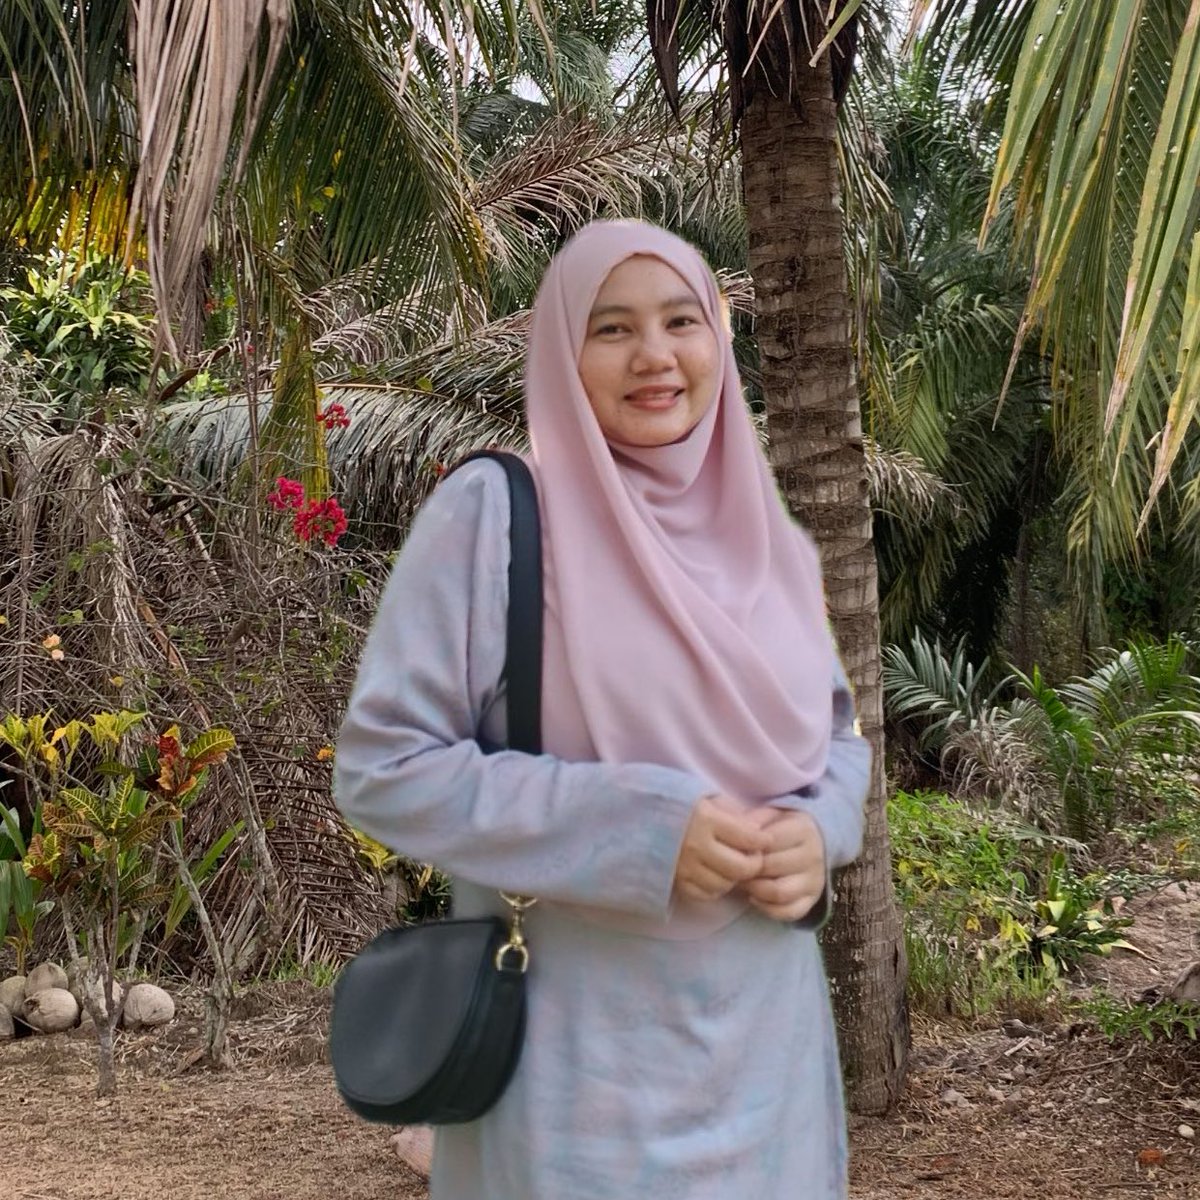 Salam @TwtJodohMY 🤍 I’m helping my friend finding her other half. I think it's the right time to find her soulmate. Target nak kahwin tahun depan. Kalau berminat you can DM me to arrange for a ta’aruf or you can reach her out on her Telegram: najwa5677